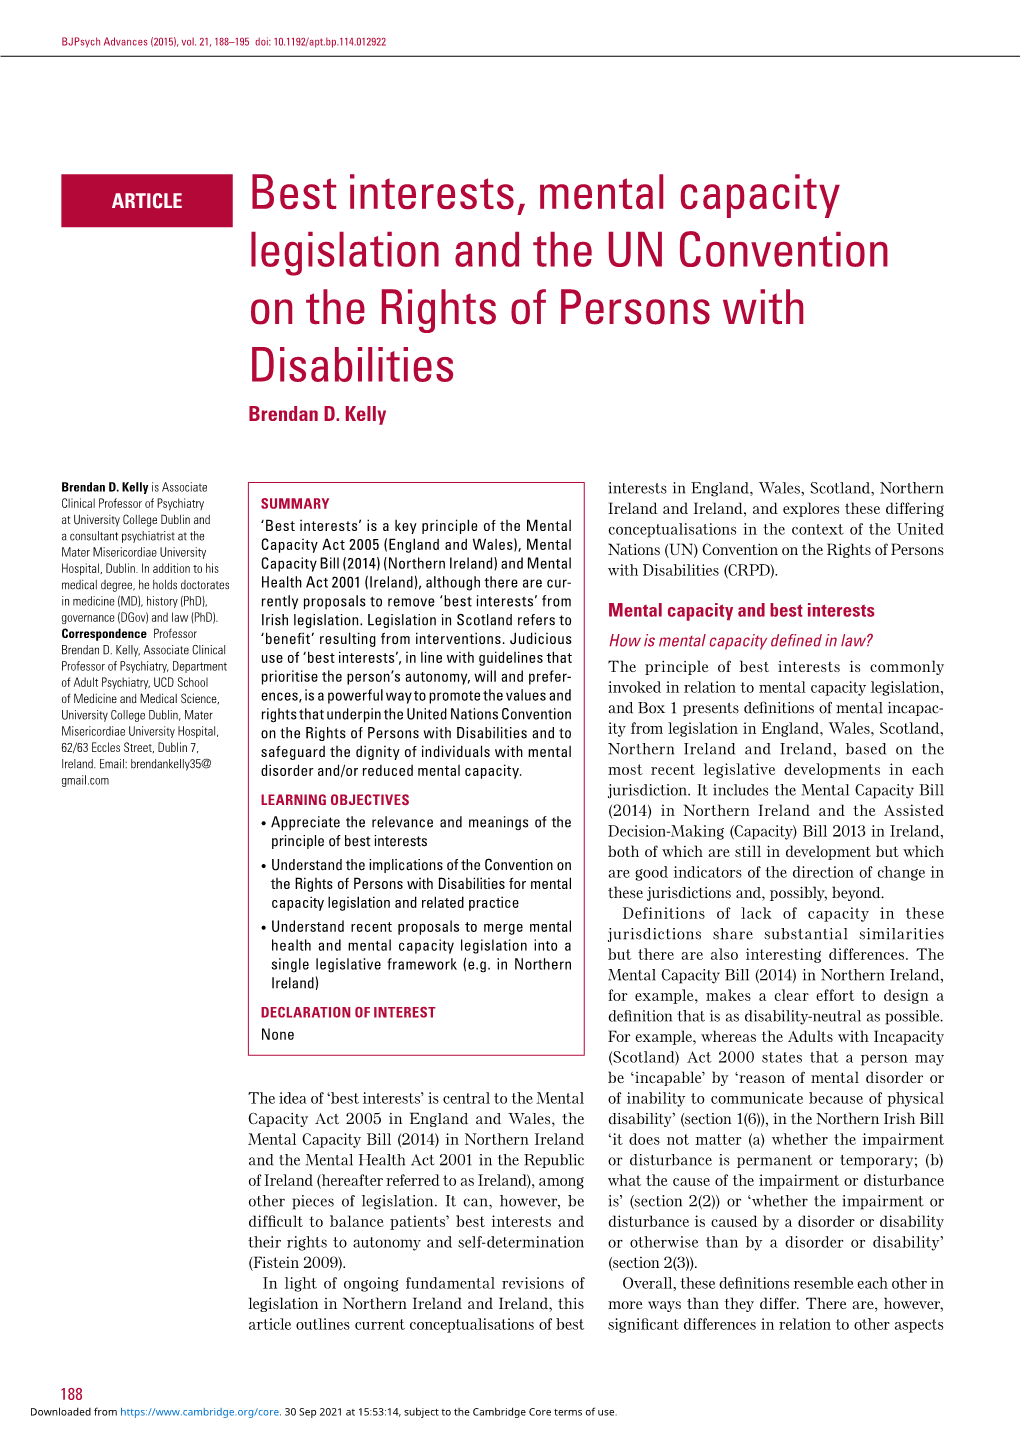 Best Interests, Mental Capacity Legislation and the UN Convention on the Rights of Persons with Disabilities Brendan D